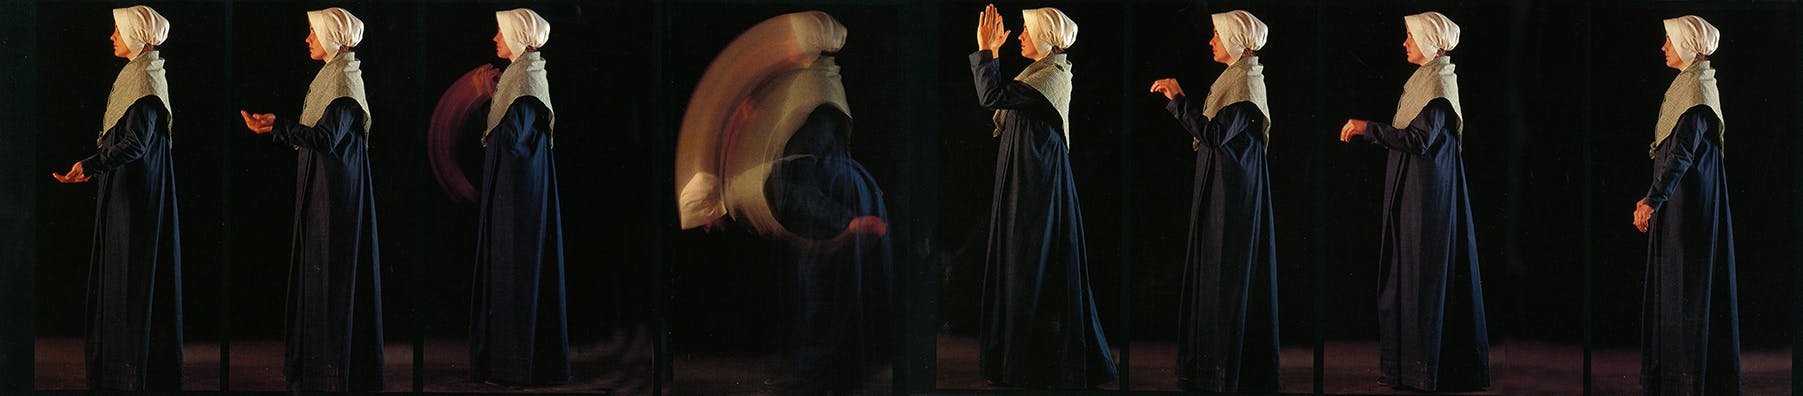 Museum interpreter showing the basic hand movements involved in the canonized version of Shaker dance